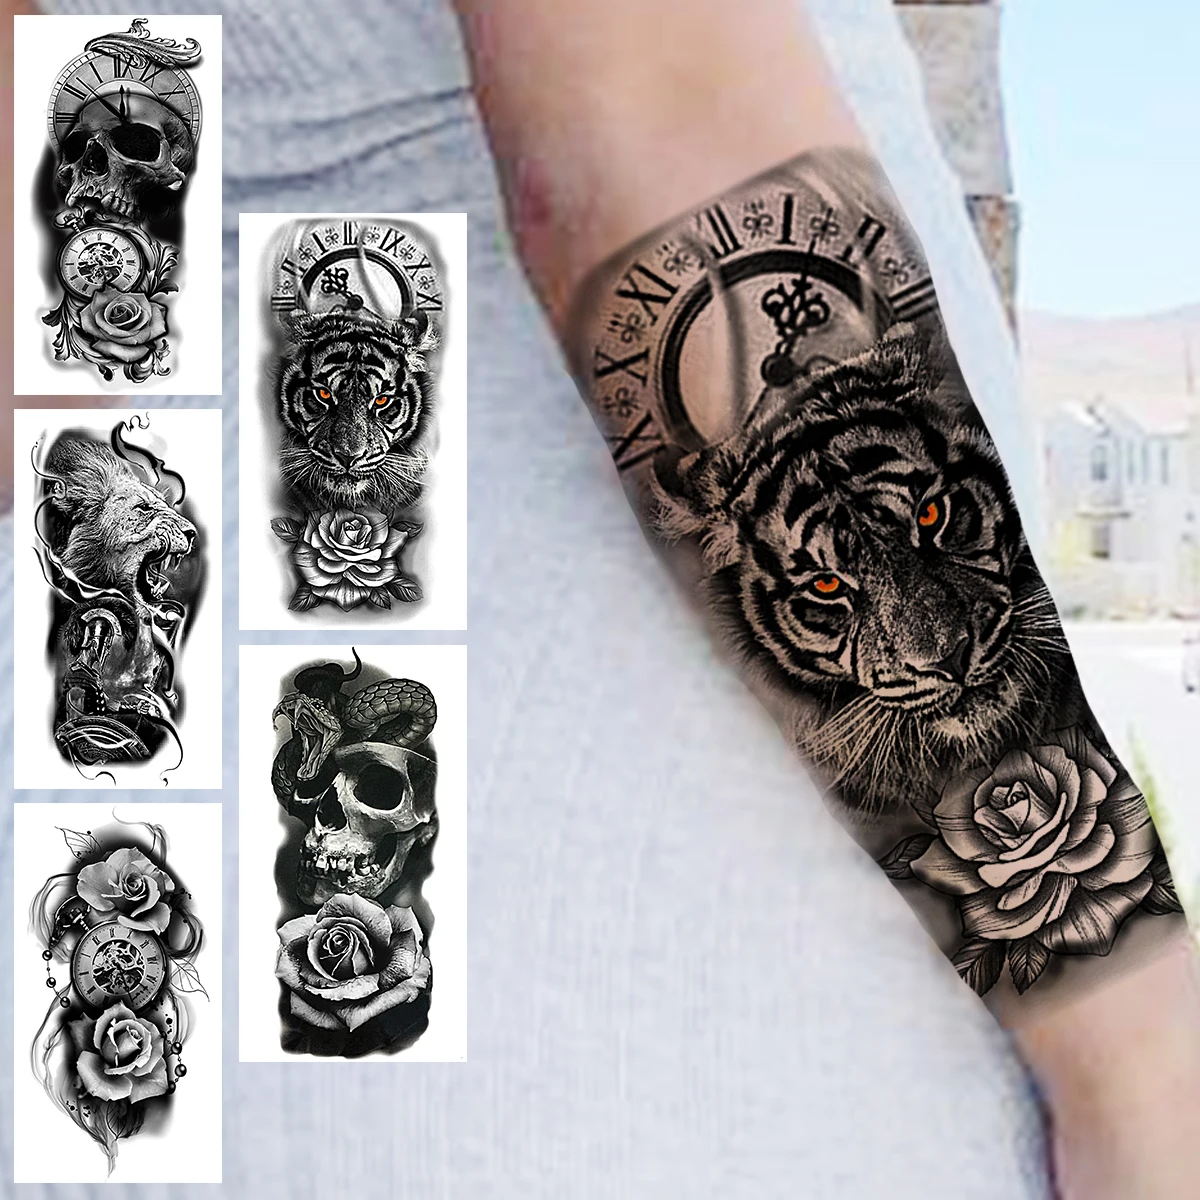 

Compass Tiger Flower Temporary Tattoos For Women Adults Realistic Scary Lion Samurai Fake Tattoo Sticker Forearm Tatoos Hot Sale